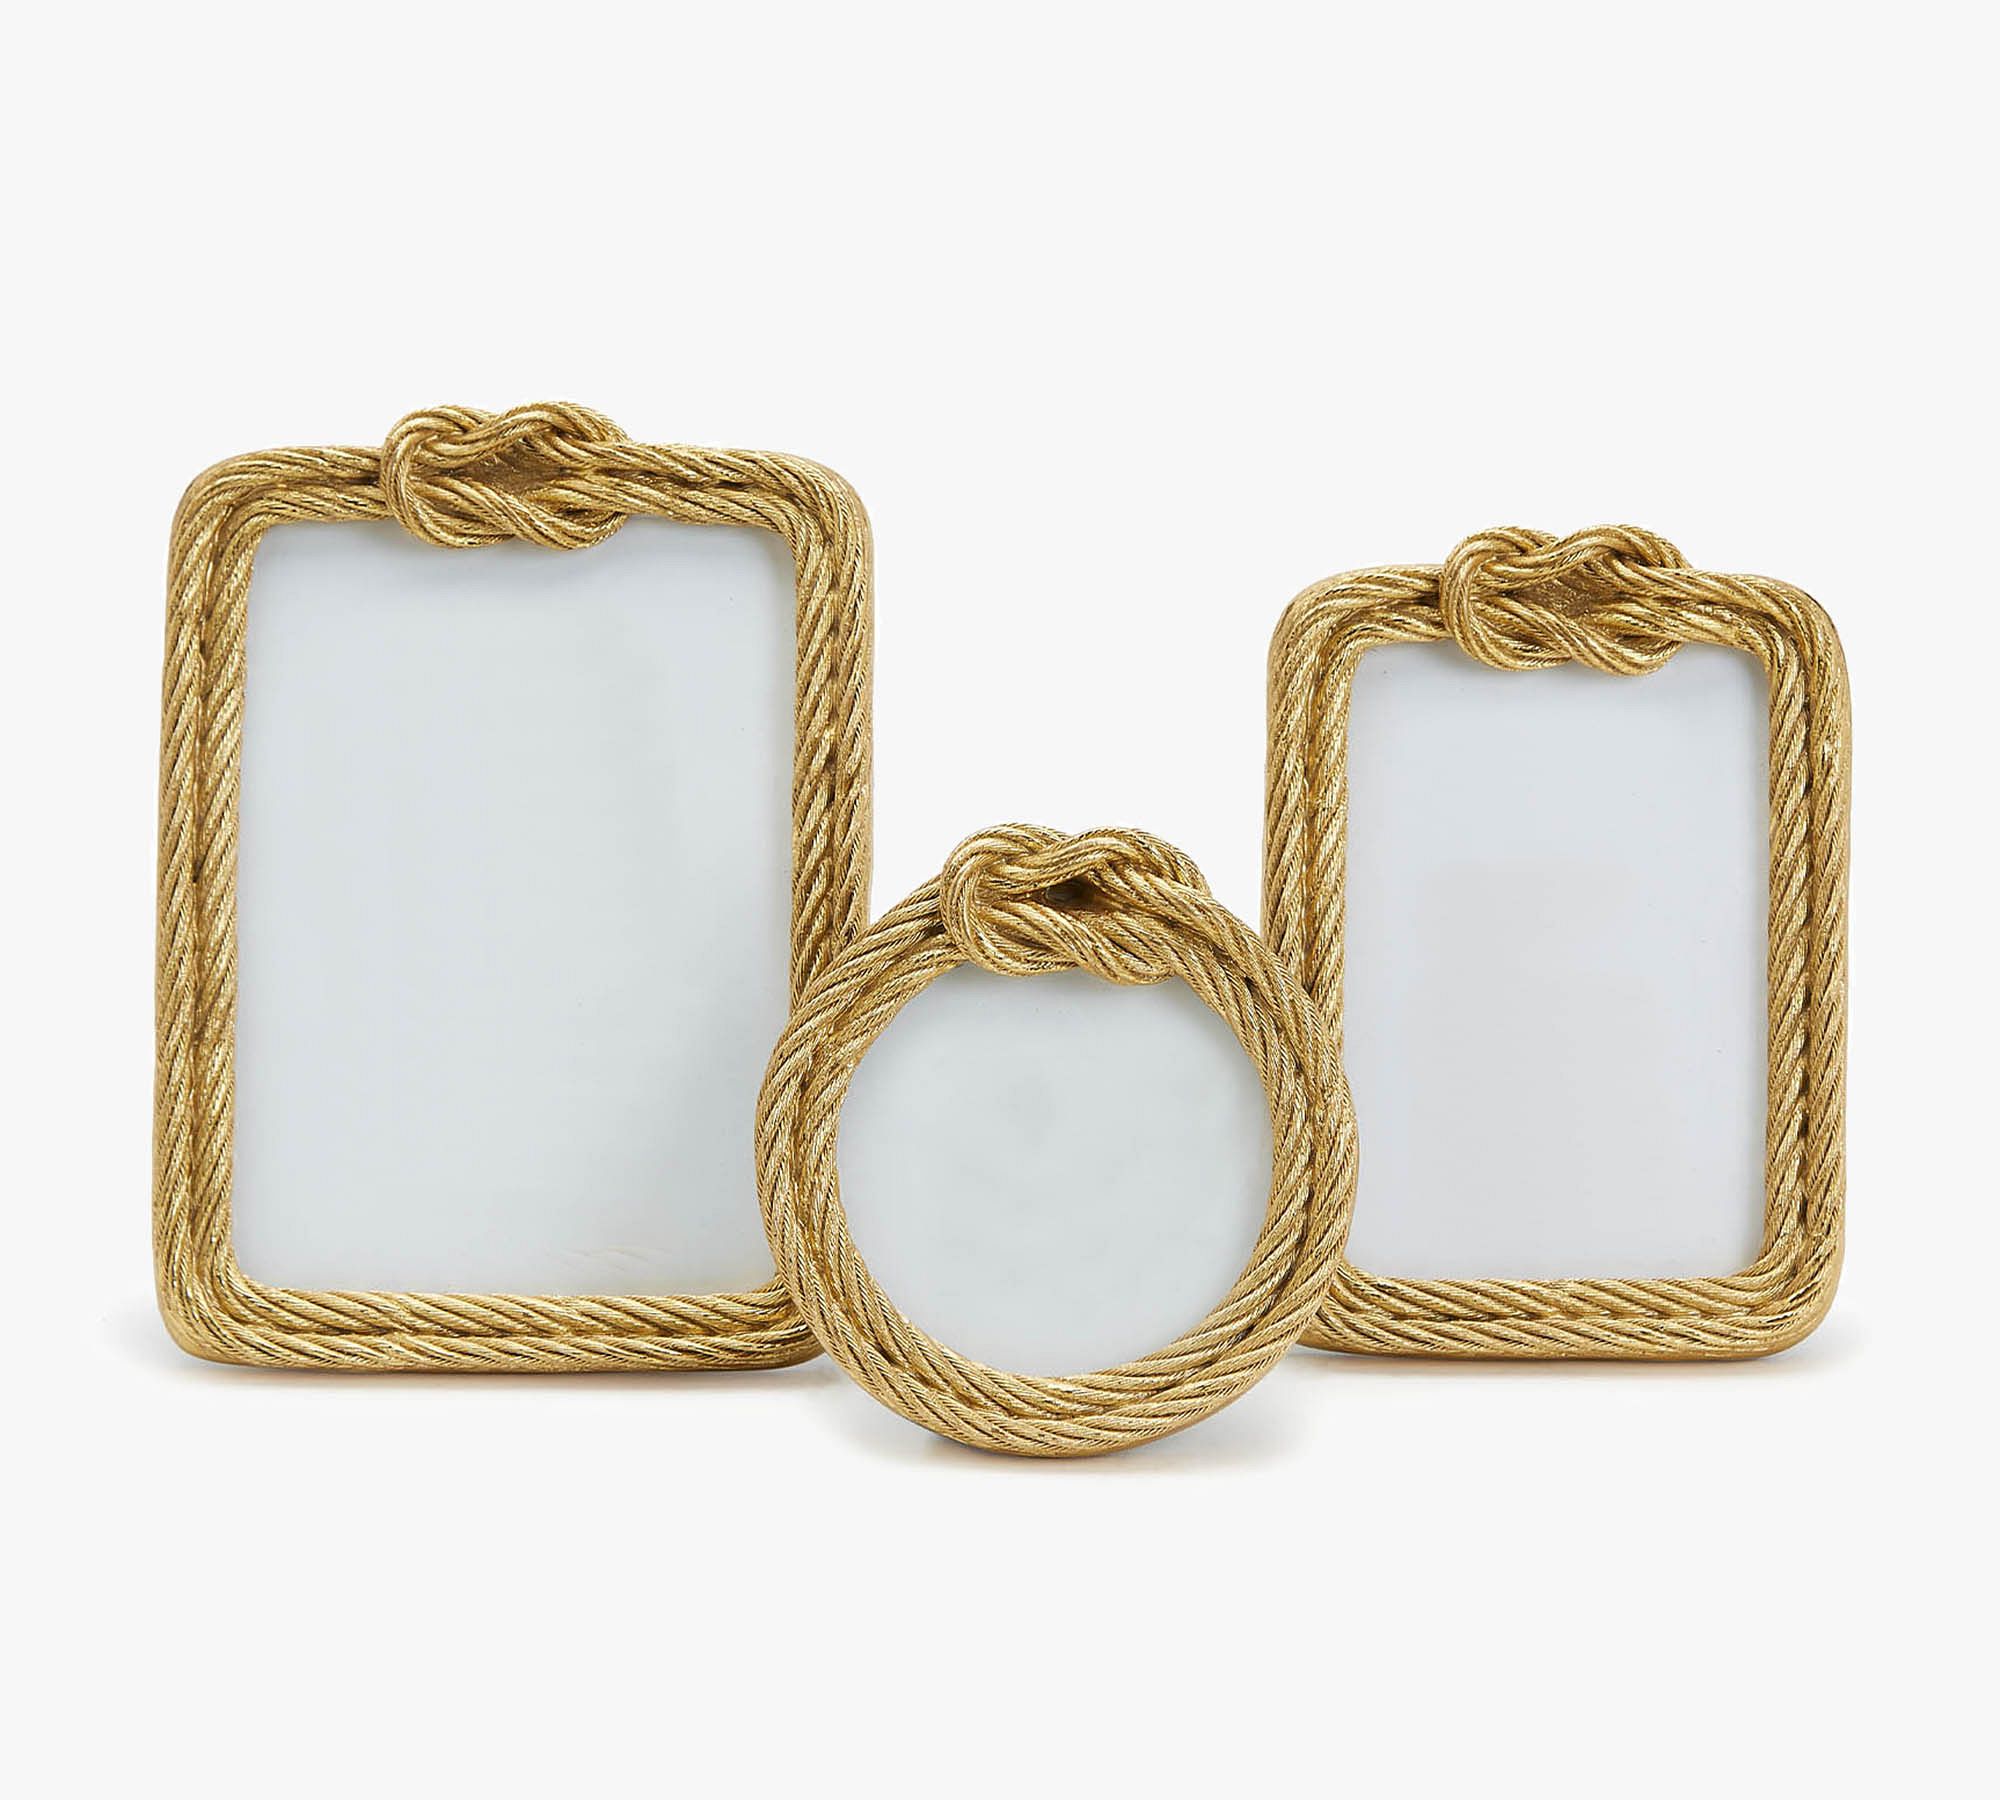 Gold Top Knot Picture Frames - Set of 3